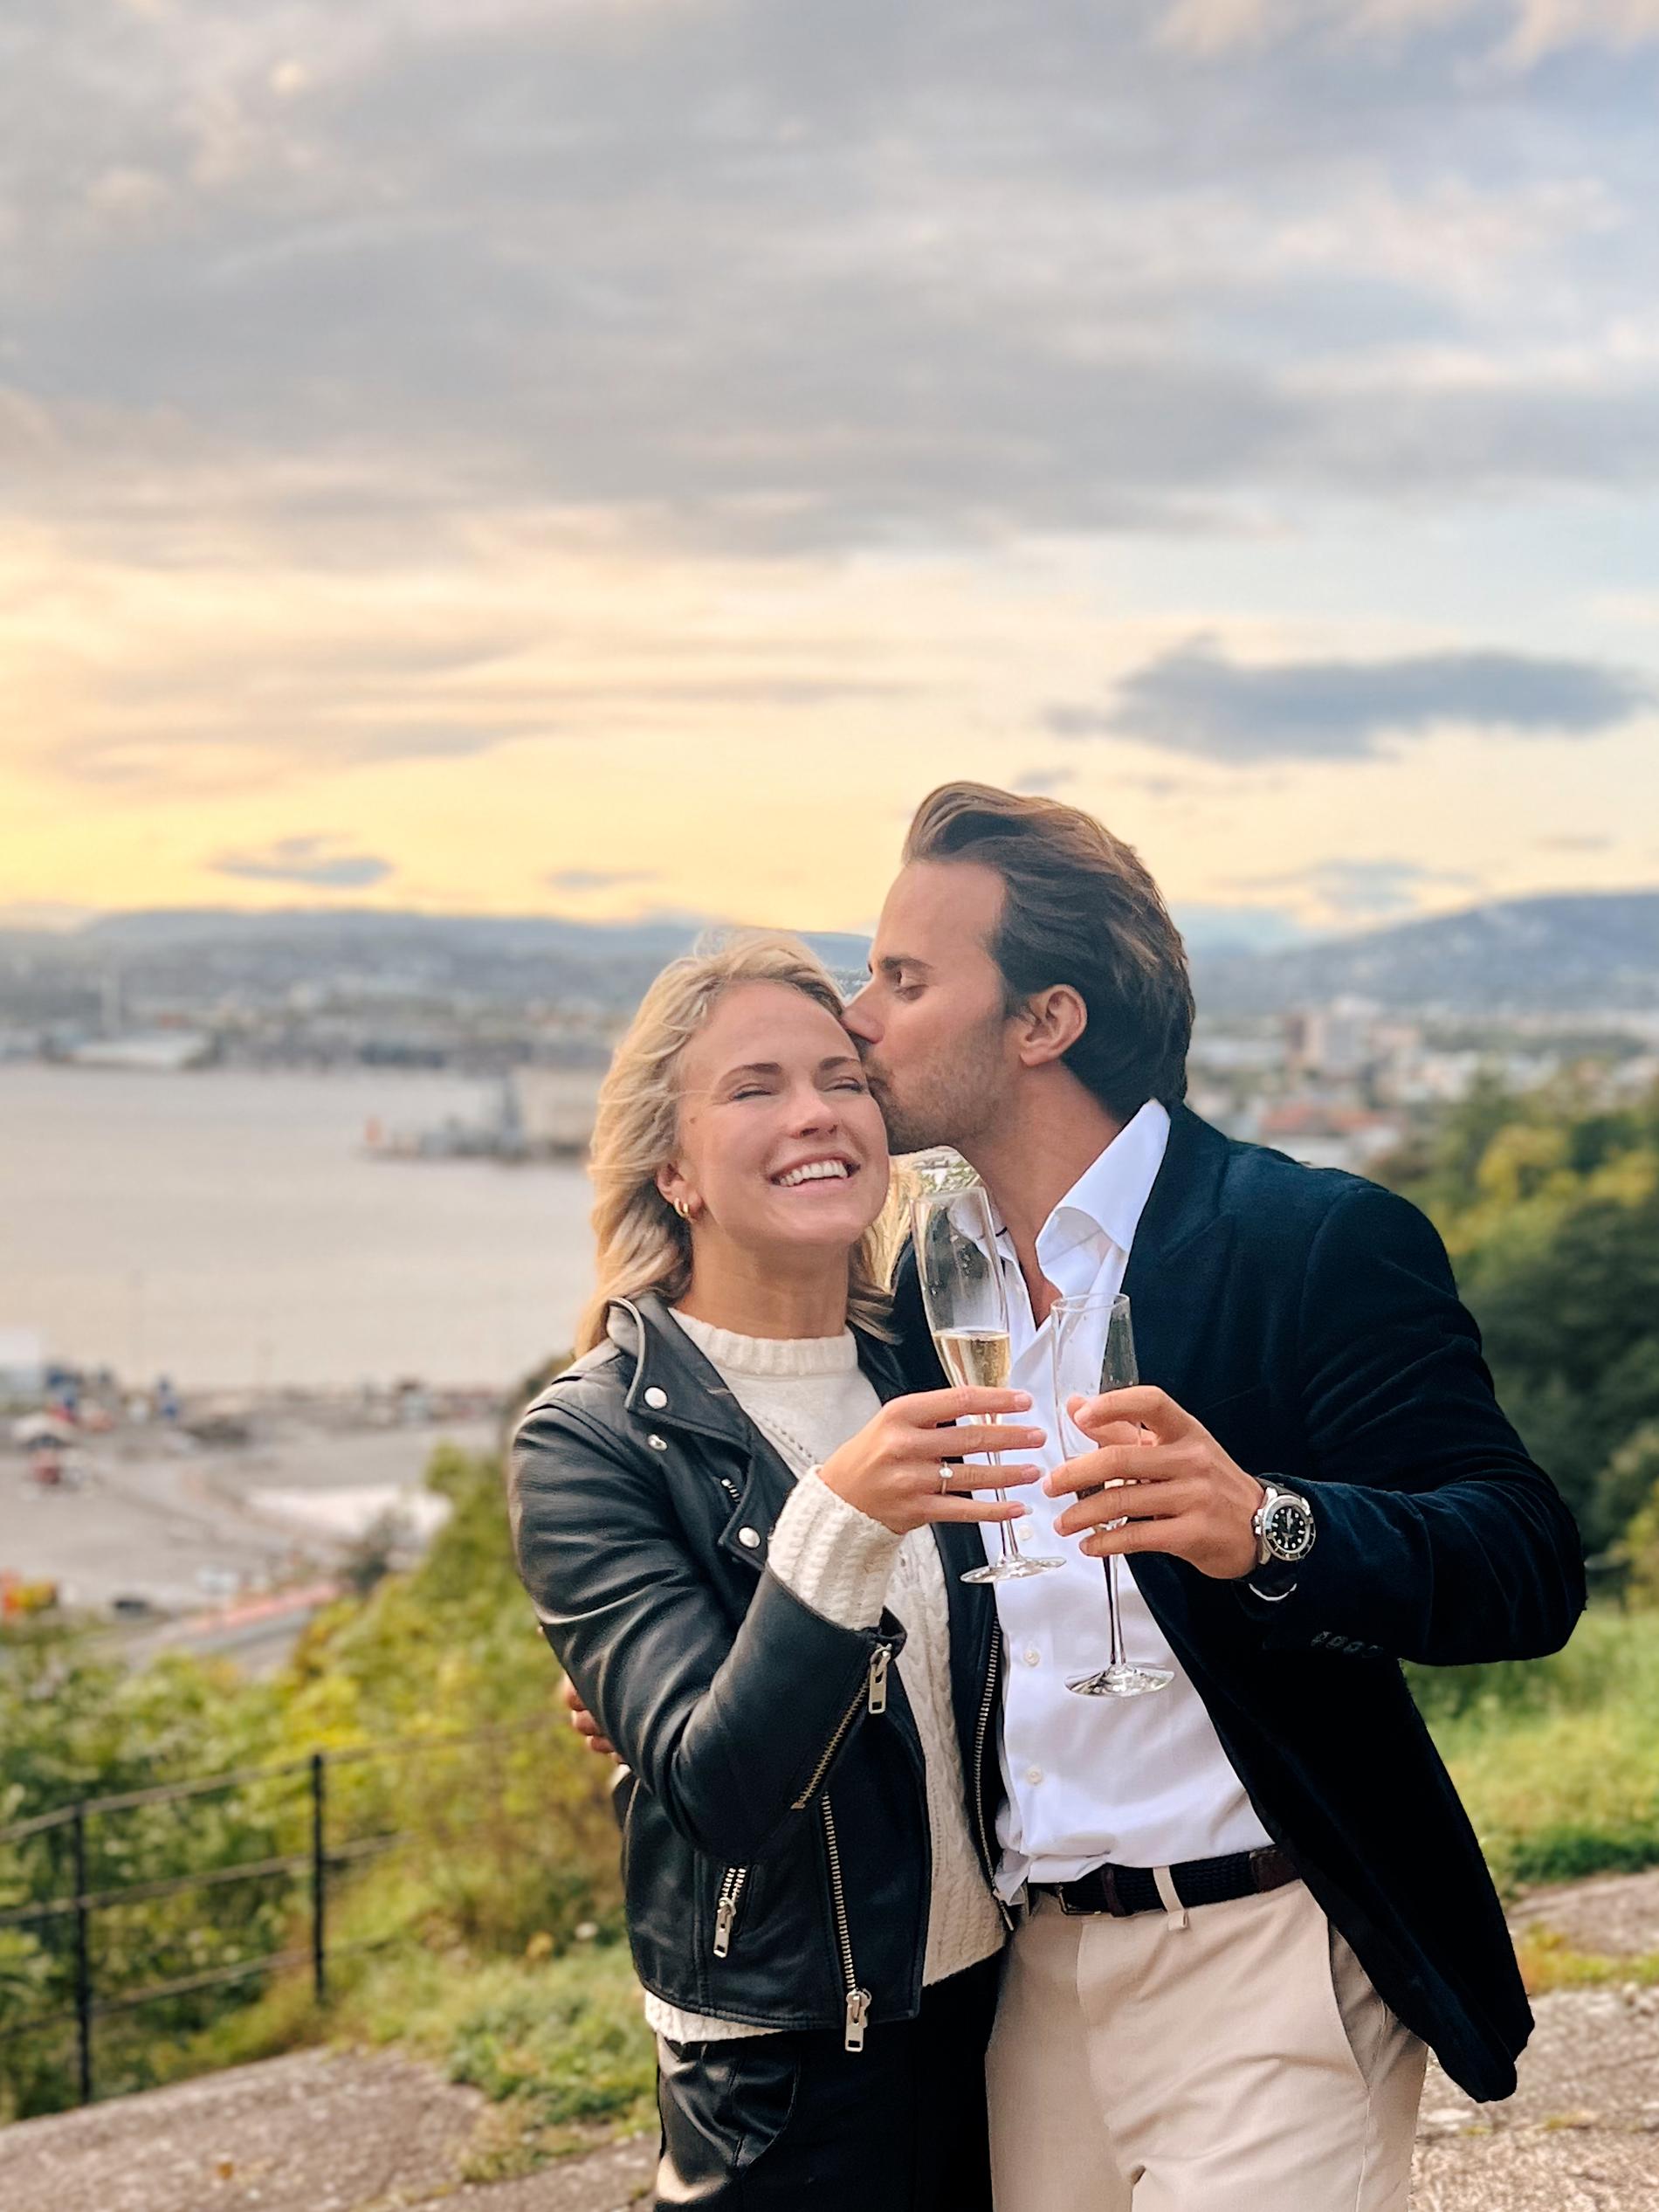 Emilie Voe Nereng Gets Engaged to Michael Hansson: A Surprise Proposal on Their First Anniversary